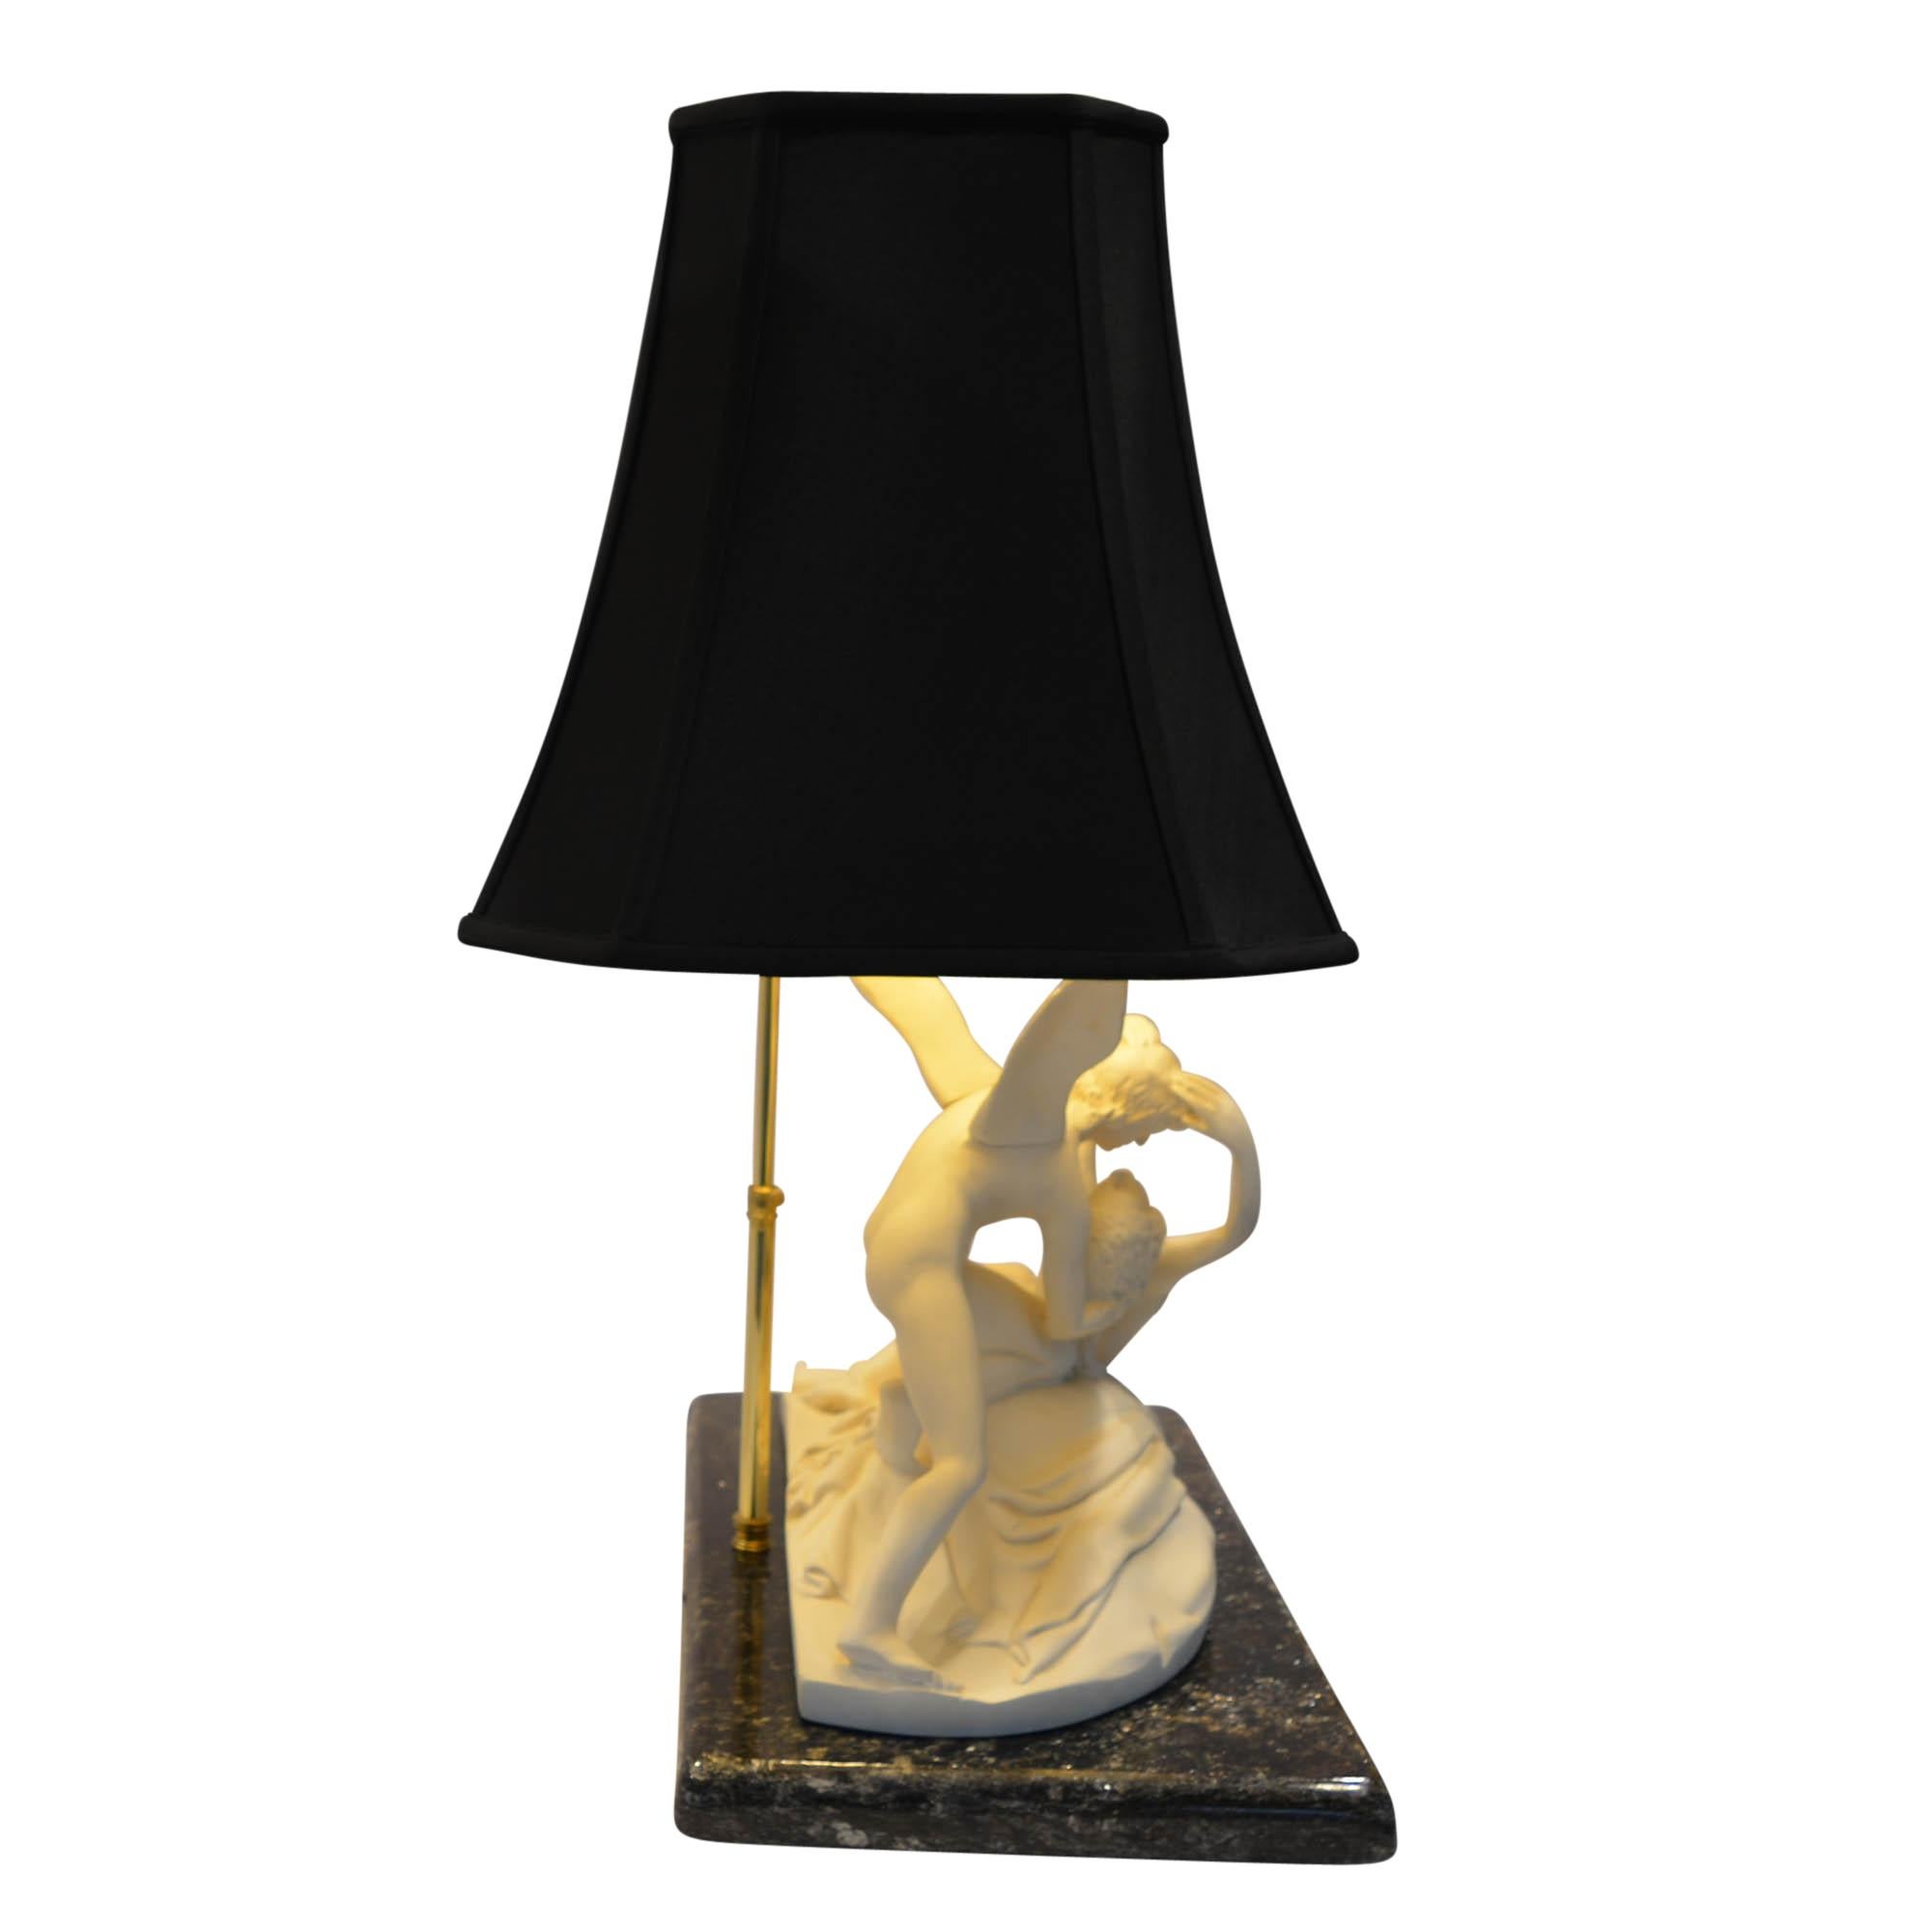 20th Century Psyche Revived by Cupid's Kiss Lamp on Marble Base Black Shade Gold Lining